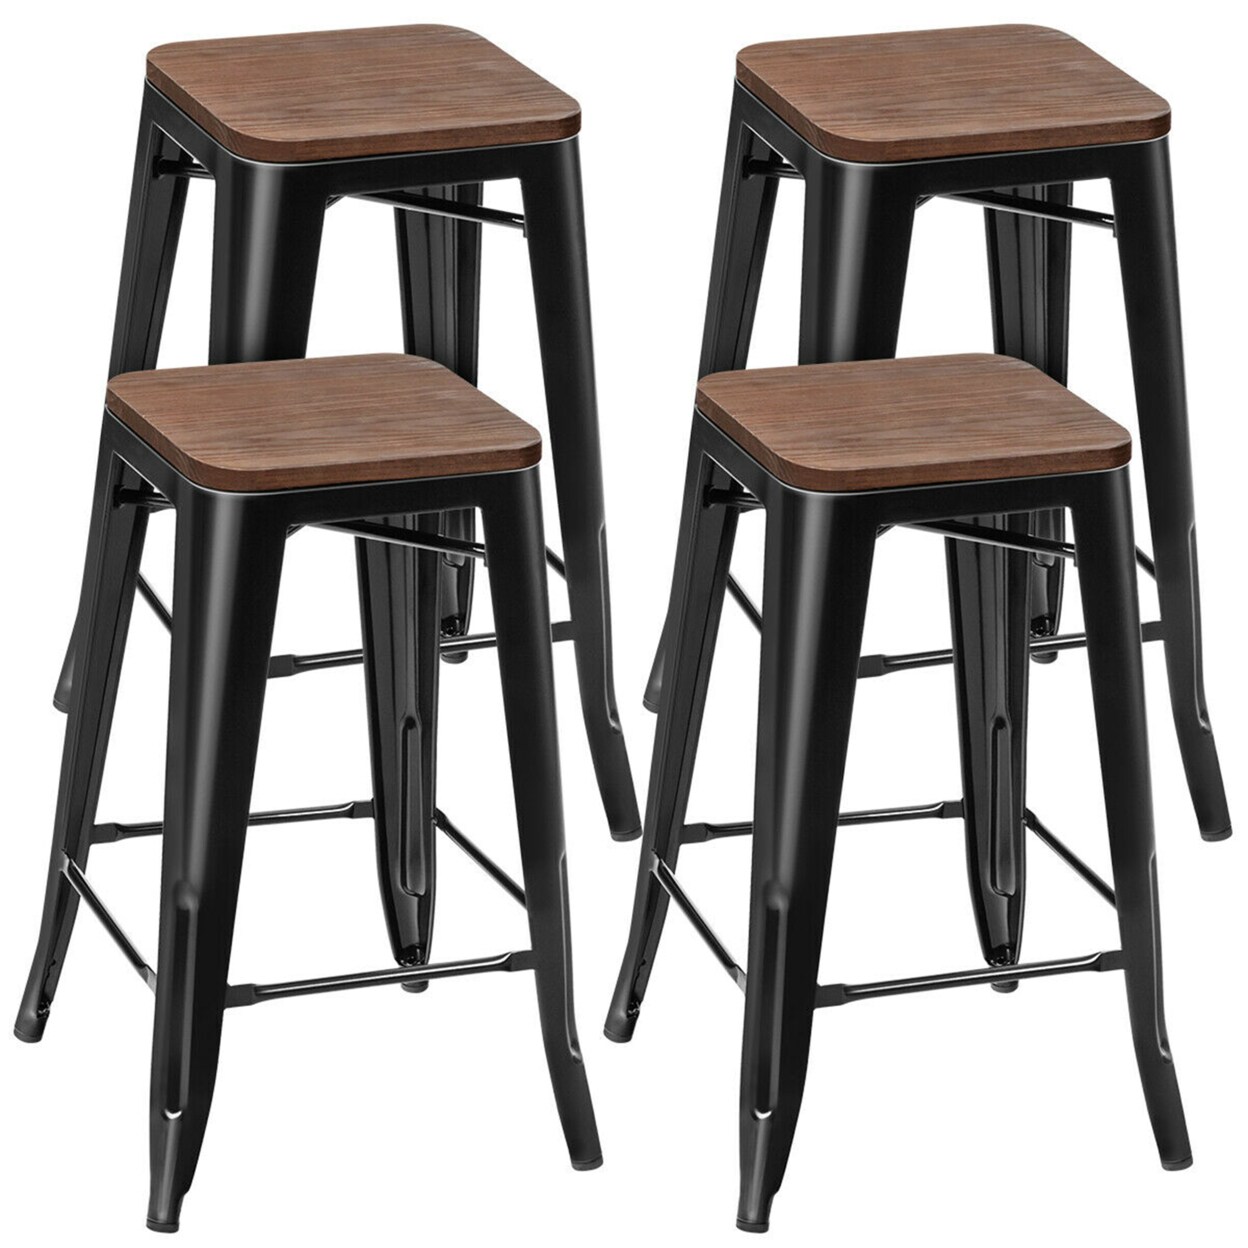 Gymax Set of 4 Counter Height Backless Barstool 26 Metal Stackable Stool w/Wood Seat